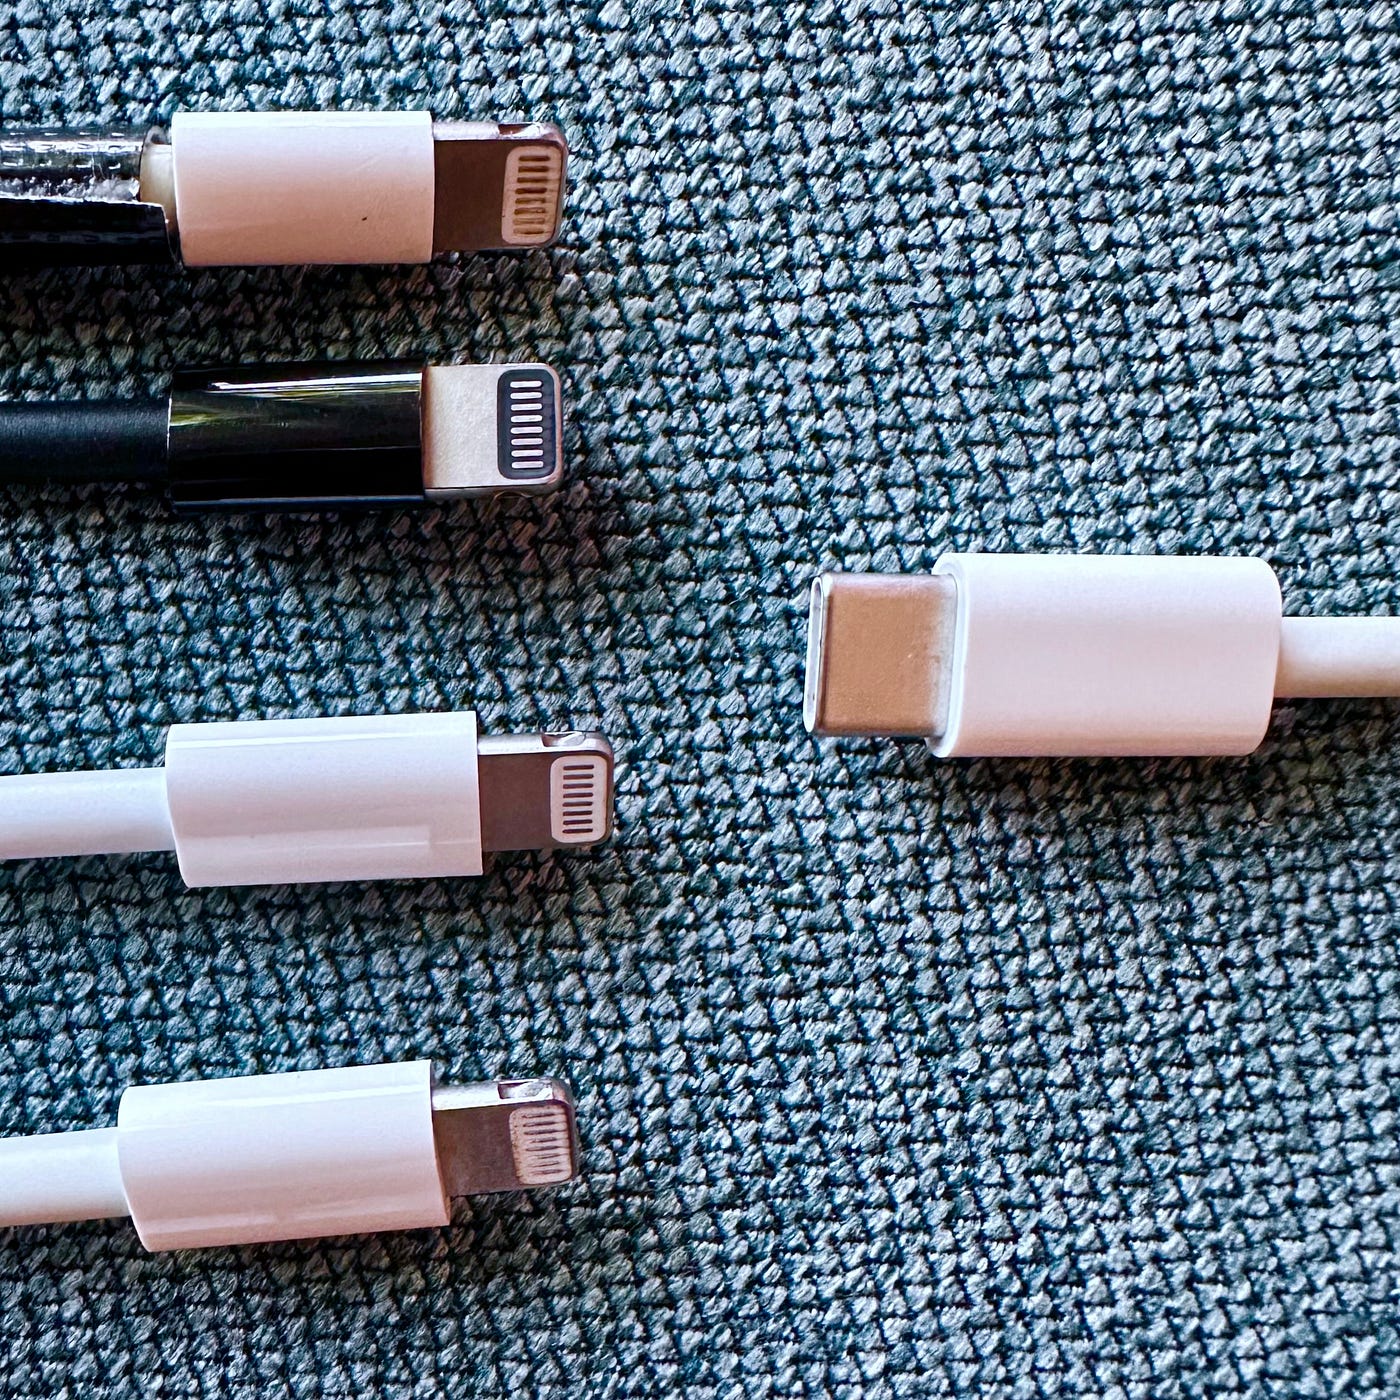 Apple's switch to USB-C on the iPhone 15 brings more cable confusion